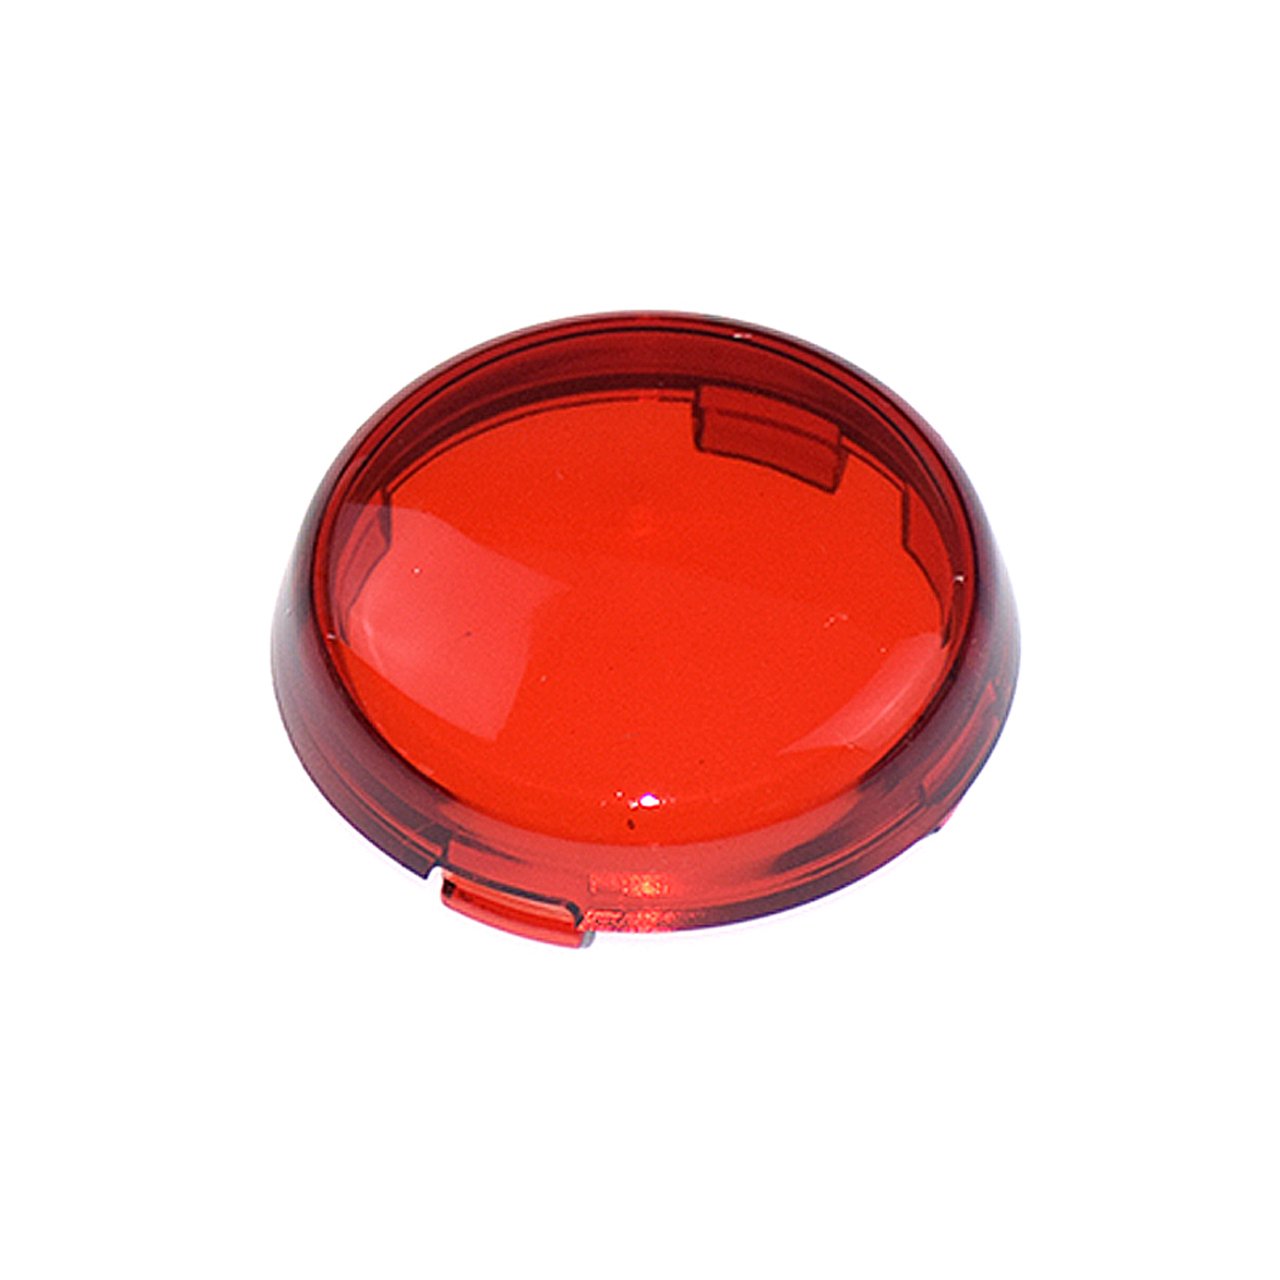 HDBUBALUS Motorcycle 1x Deuce-Style Replacement Part Turn Signal Lens Fit for Harley Softail Dyna Red von HDBUBALUS